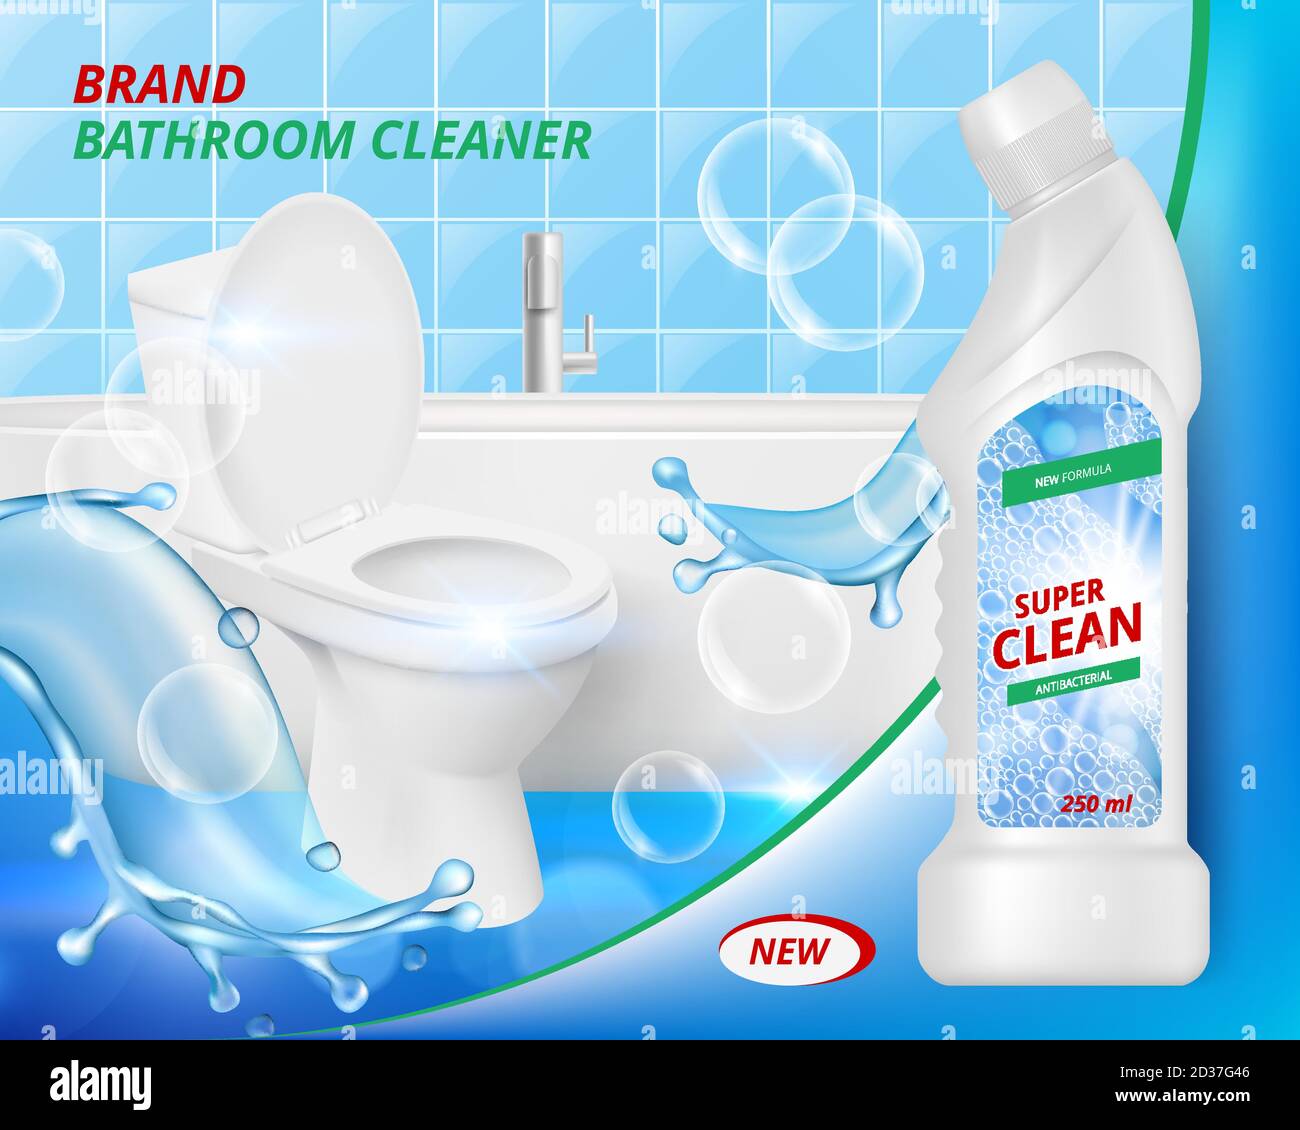 Toilet Detergent Cleaner Bathroom Soap Liquid Washing Clean Of Ceramic Sink Advertizing Realistic Placard Vector Template 2D37G46 